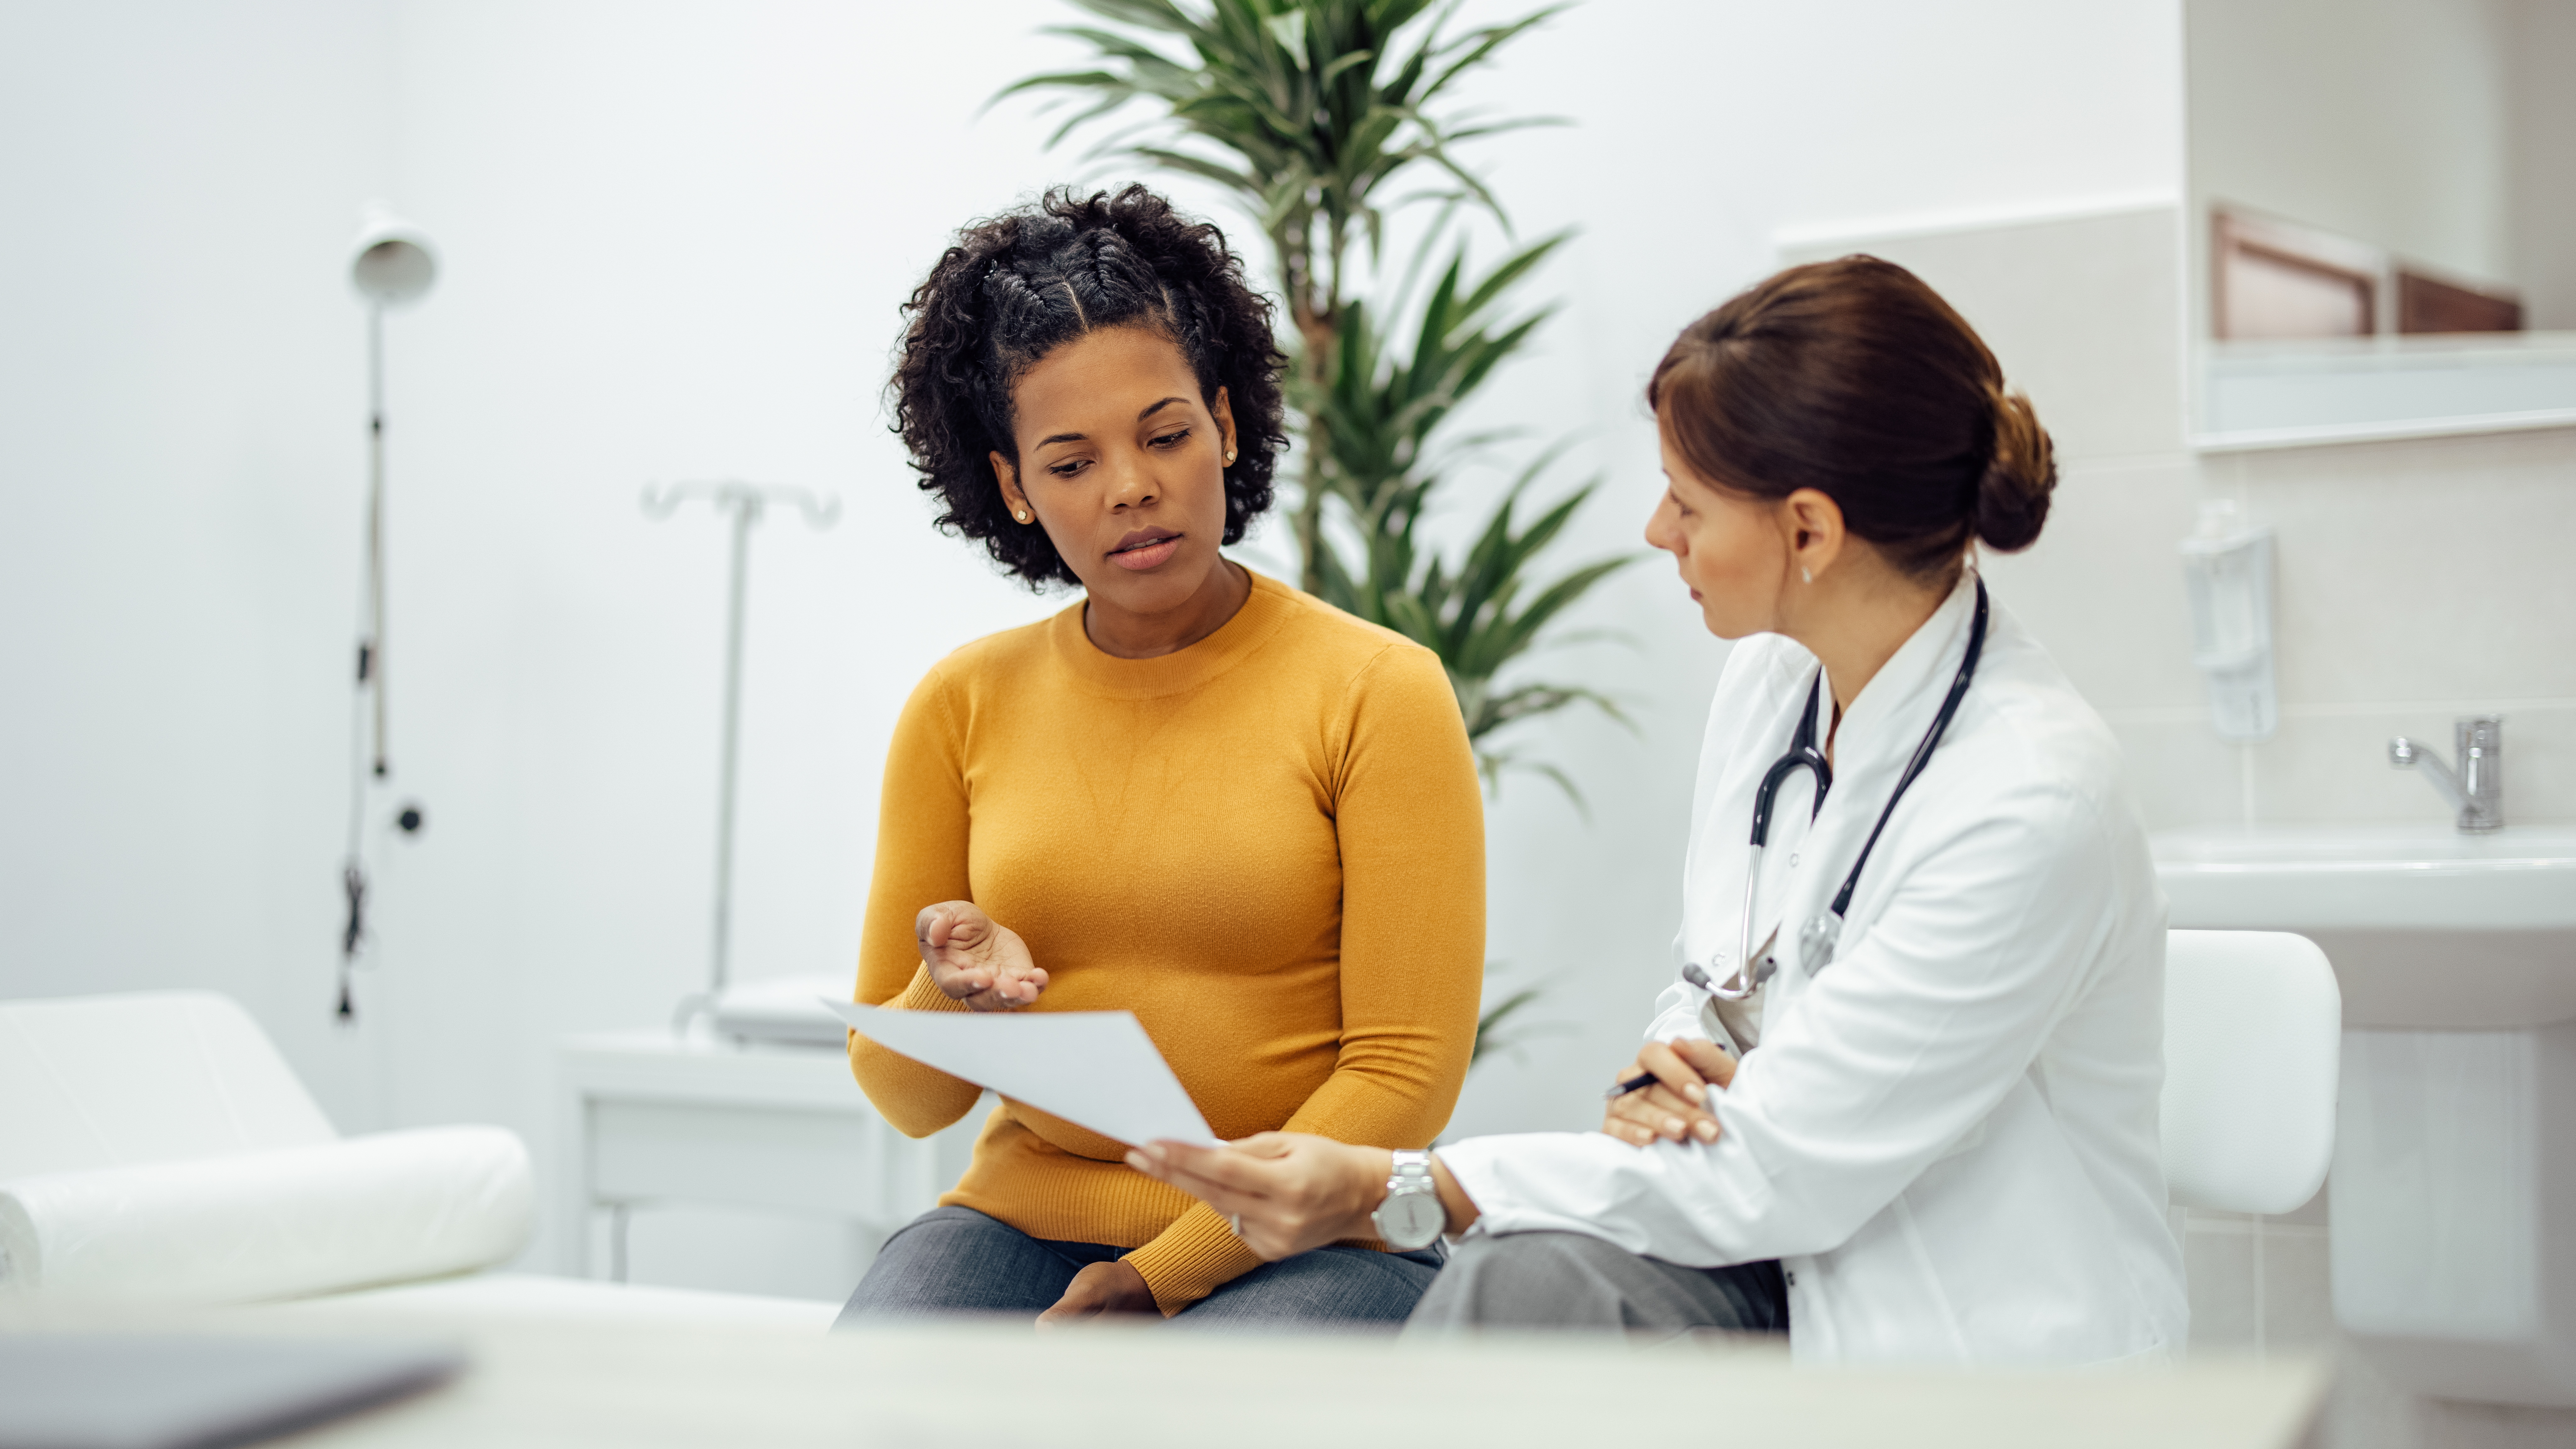 Female patient and doctor discussing test results in medical office.